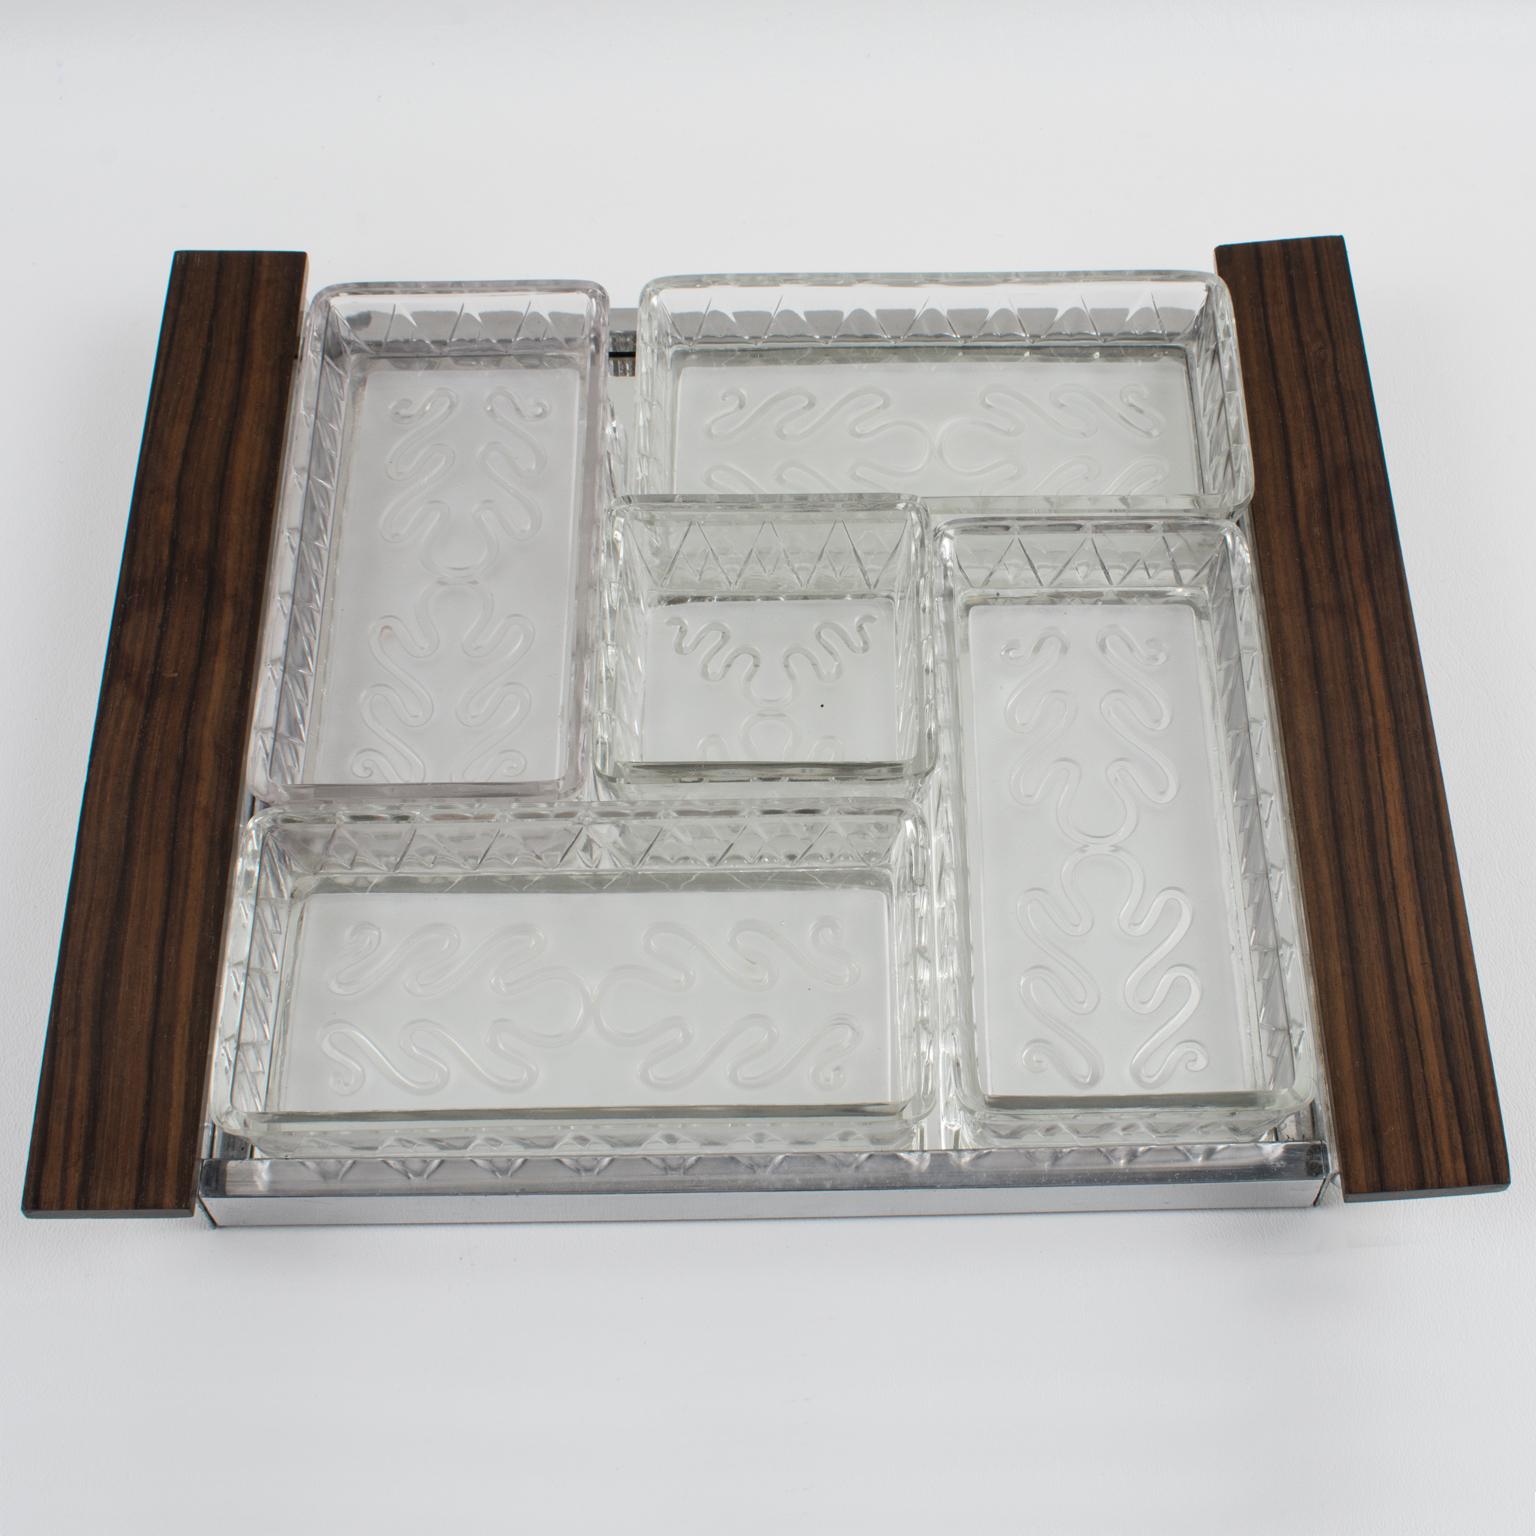 Art Deco Cocktail Barware Chrome and Macassar Wood Tray with Glass Dishes 1